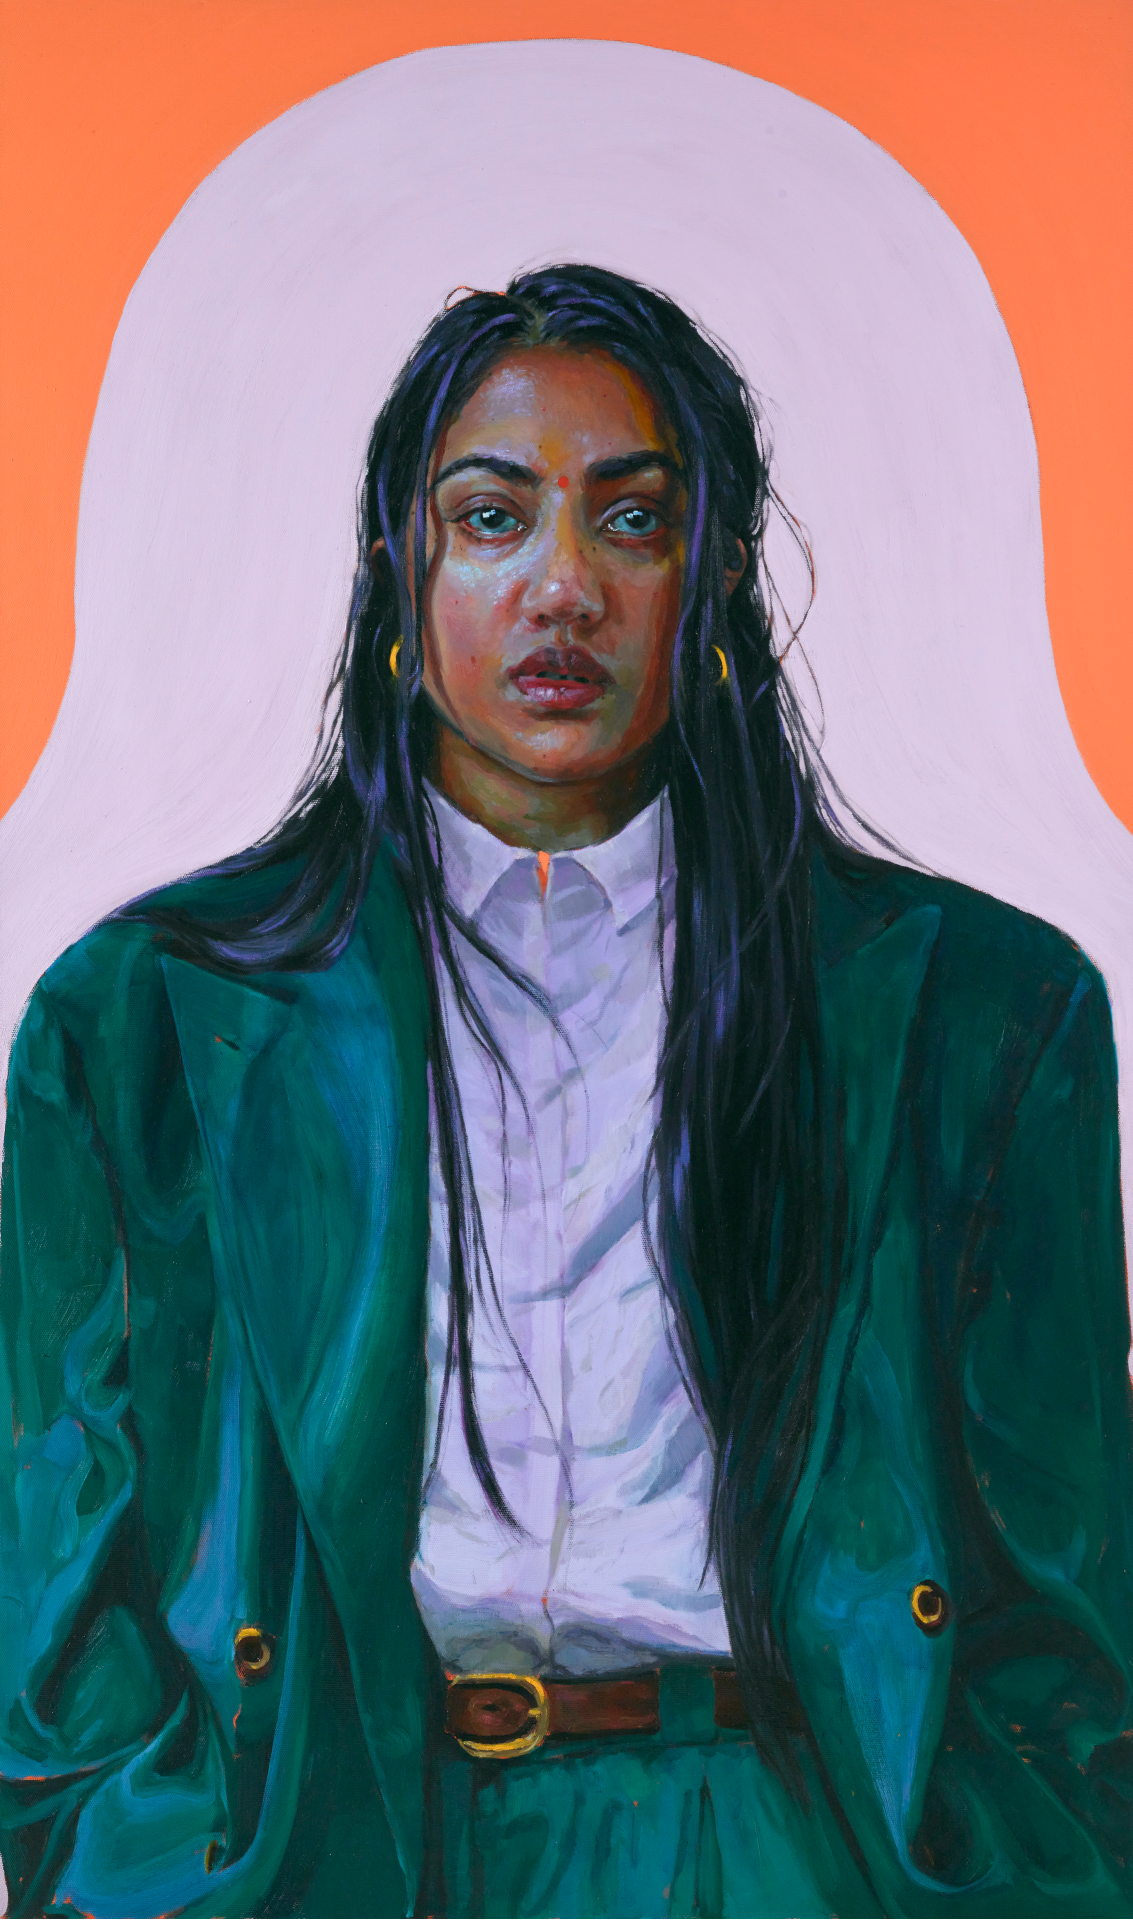 A self-portrait of Kirthna Selvaraj looking straight ahead and wearing an oversized green suit, with a white button-down